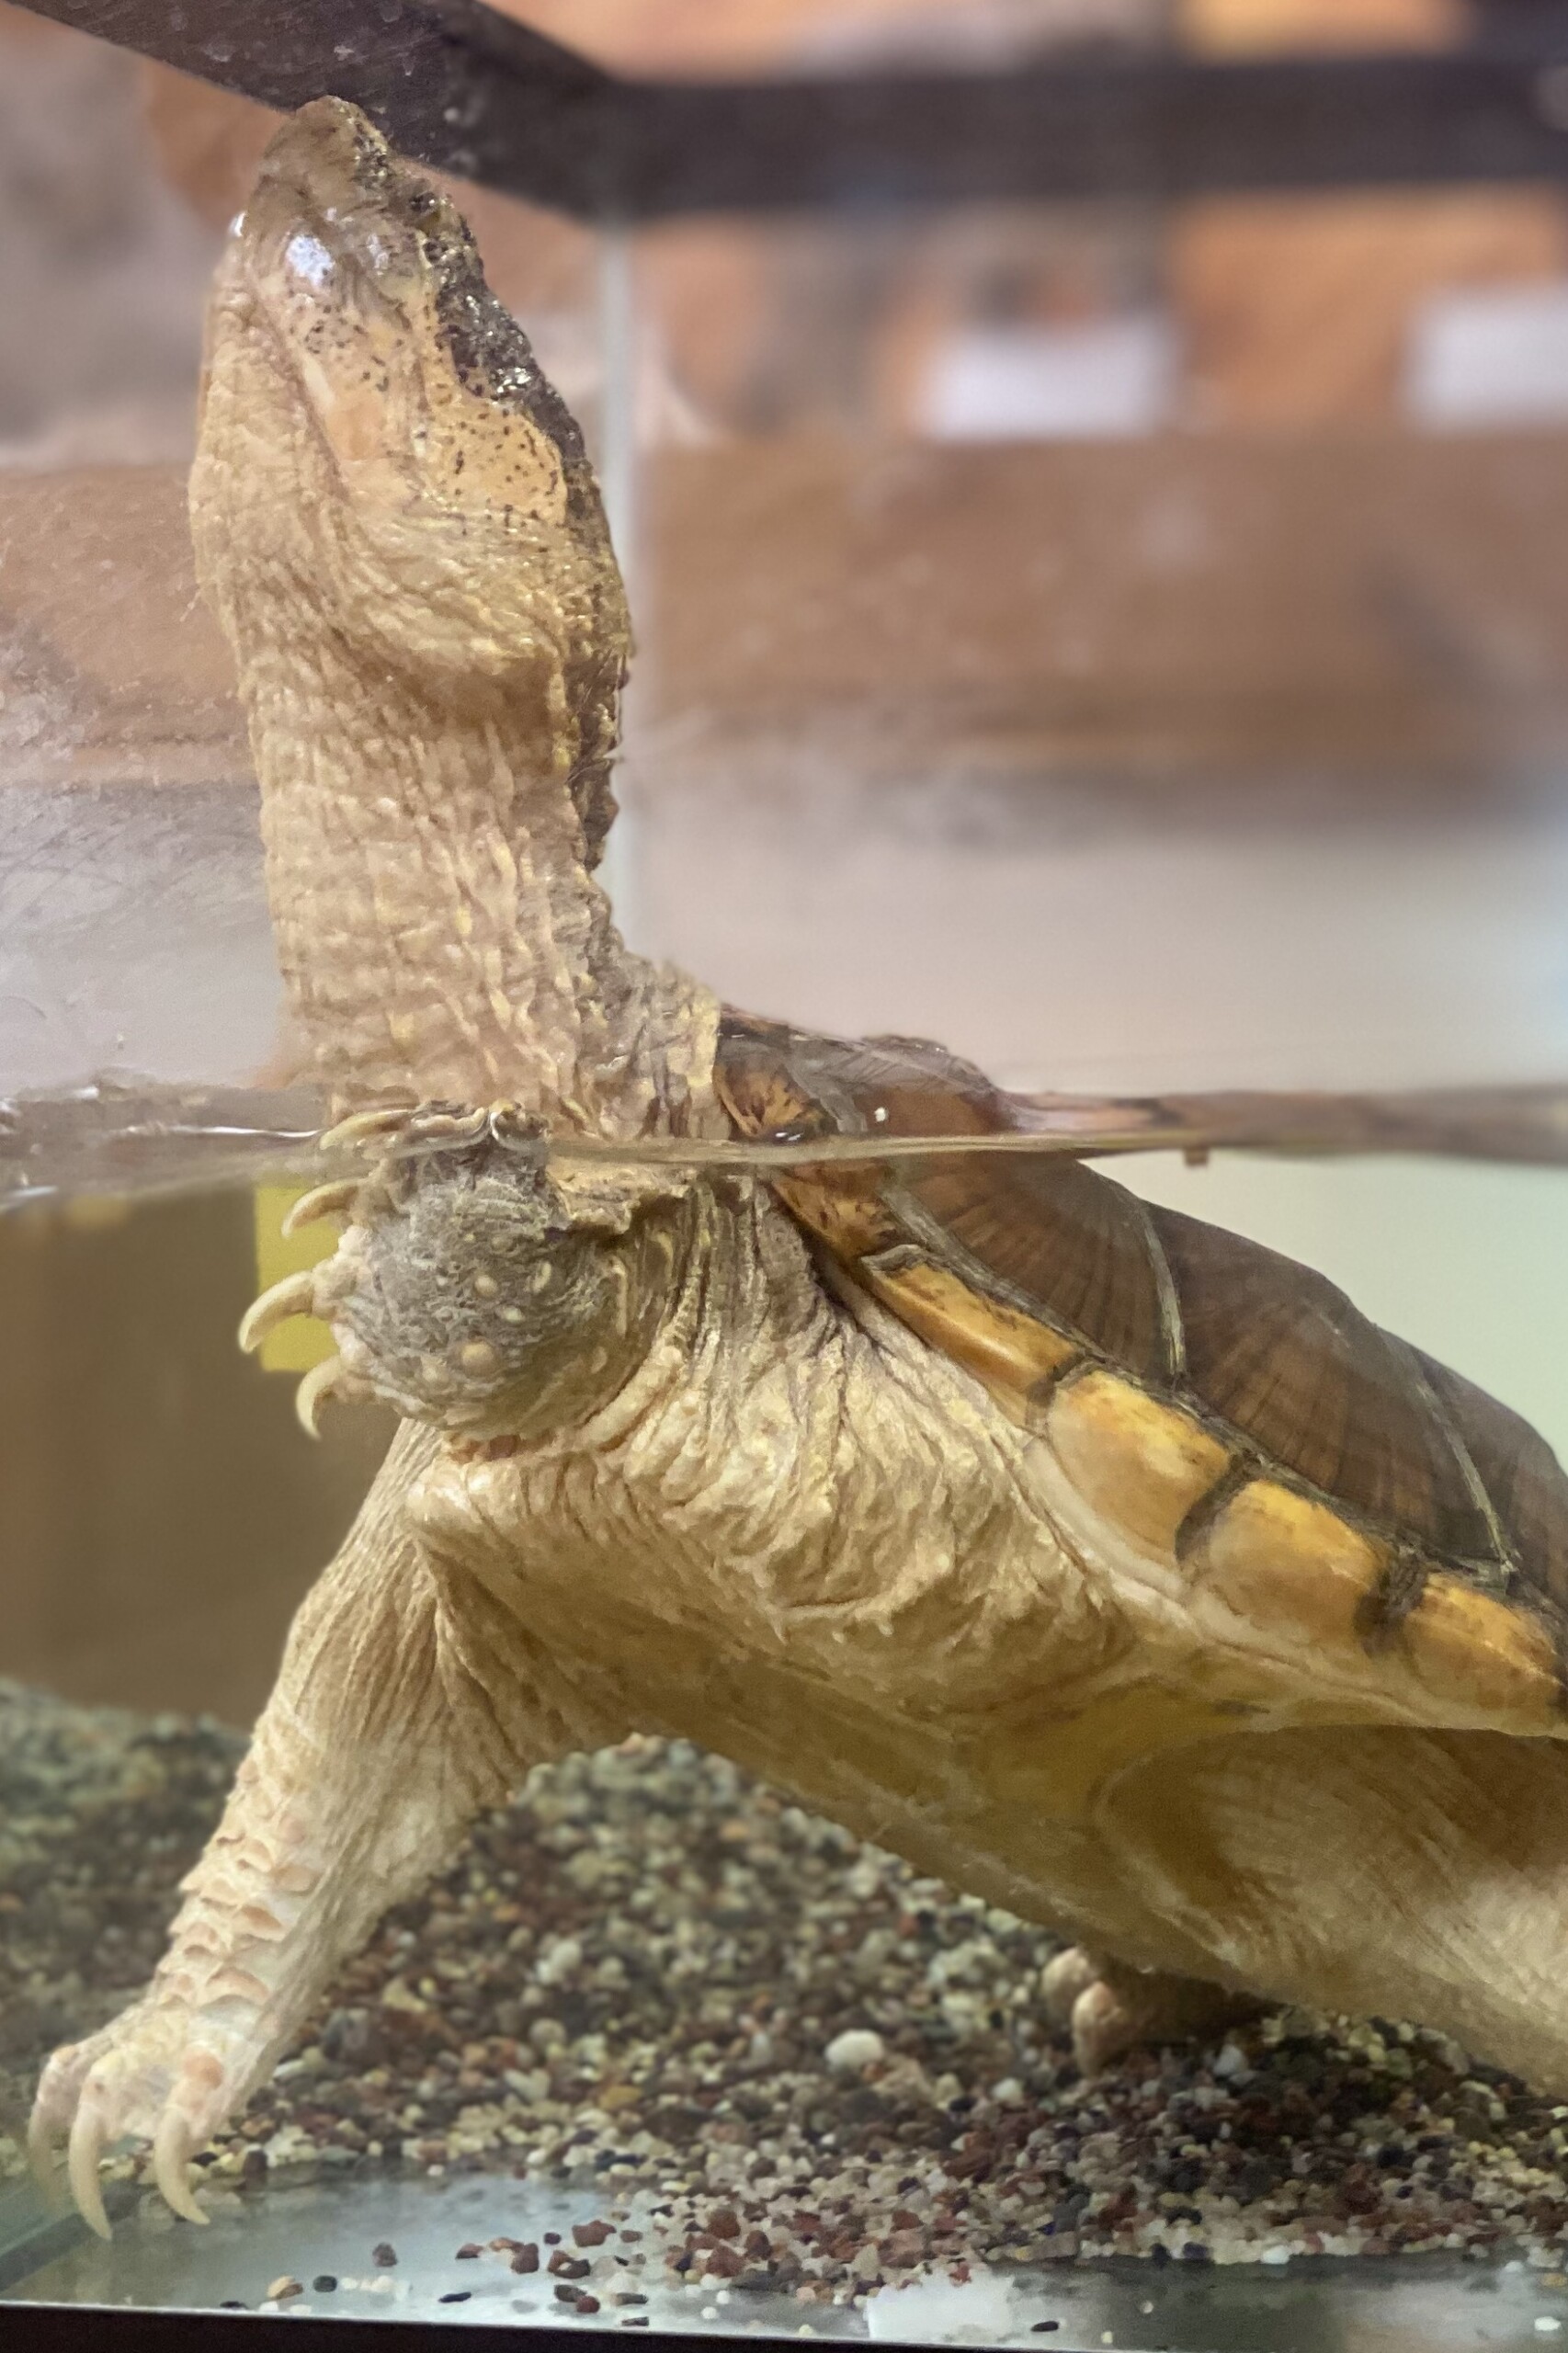 aqua the snapping turtle stretching his neck 